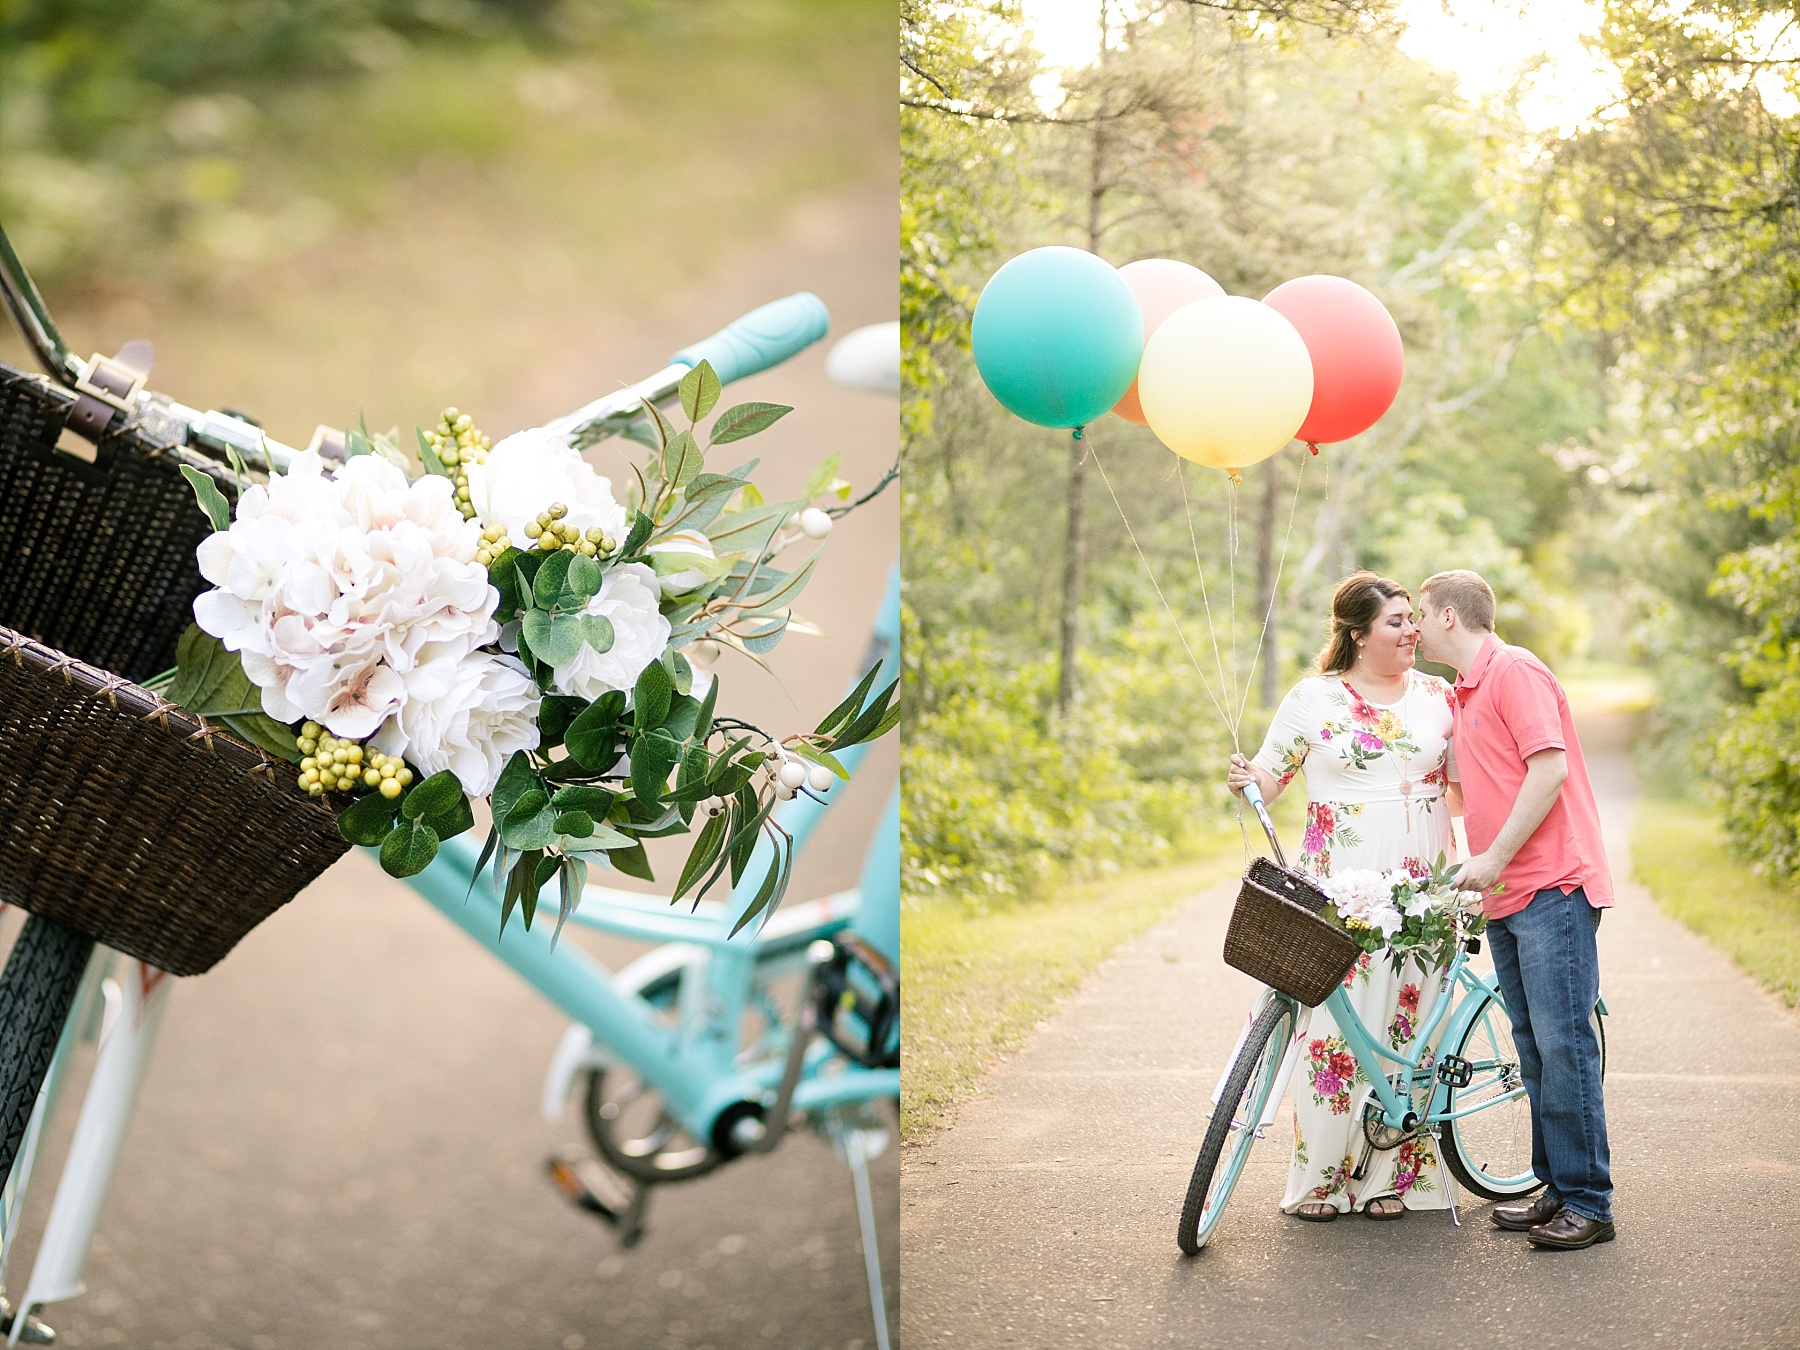 A vintage looking Schwinn with a bike basket & big round balloons were the cutest accessories for Jessica & Bradley's Eau Claire engagement photos.